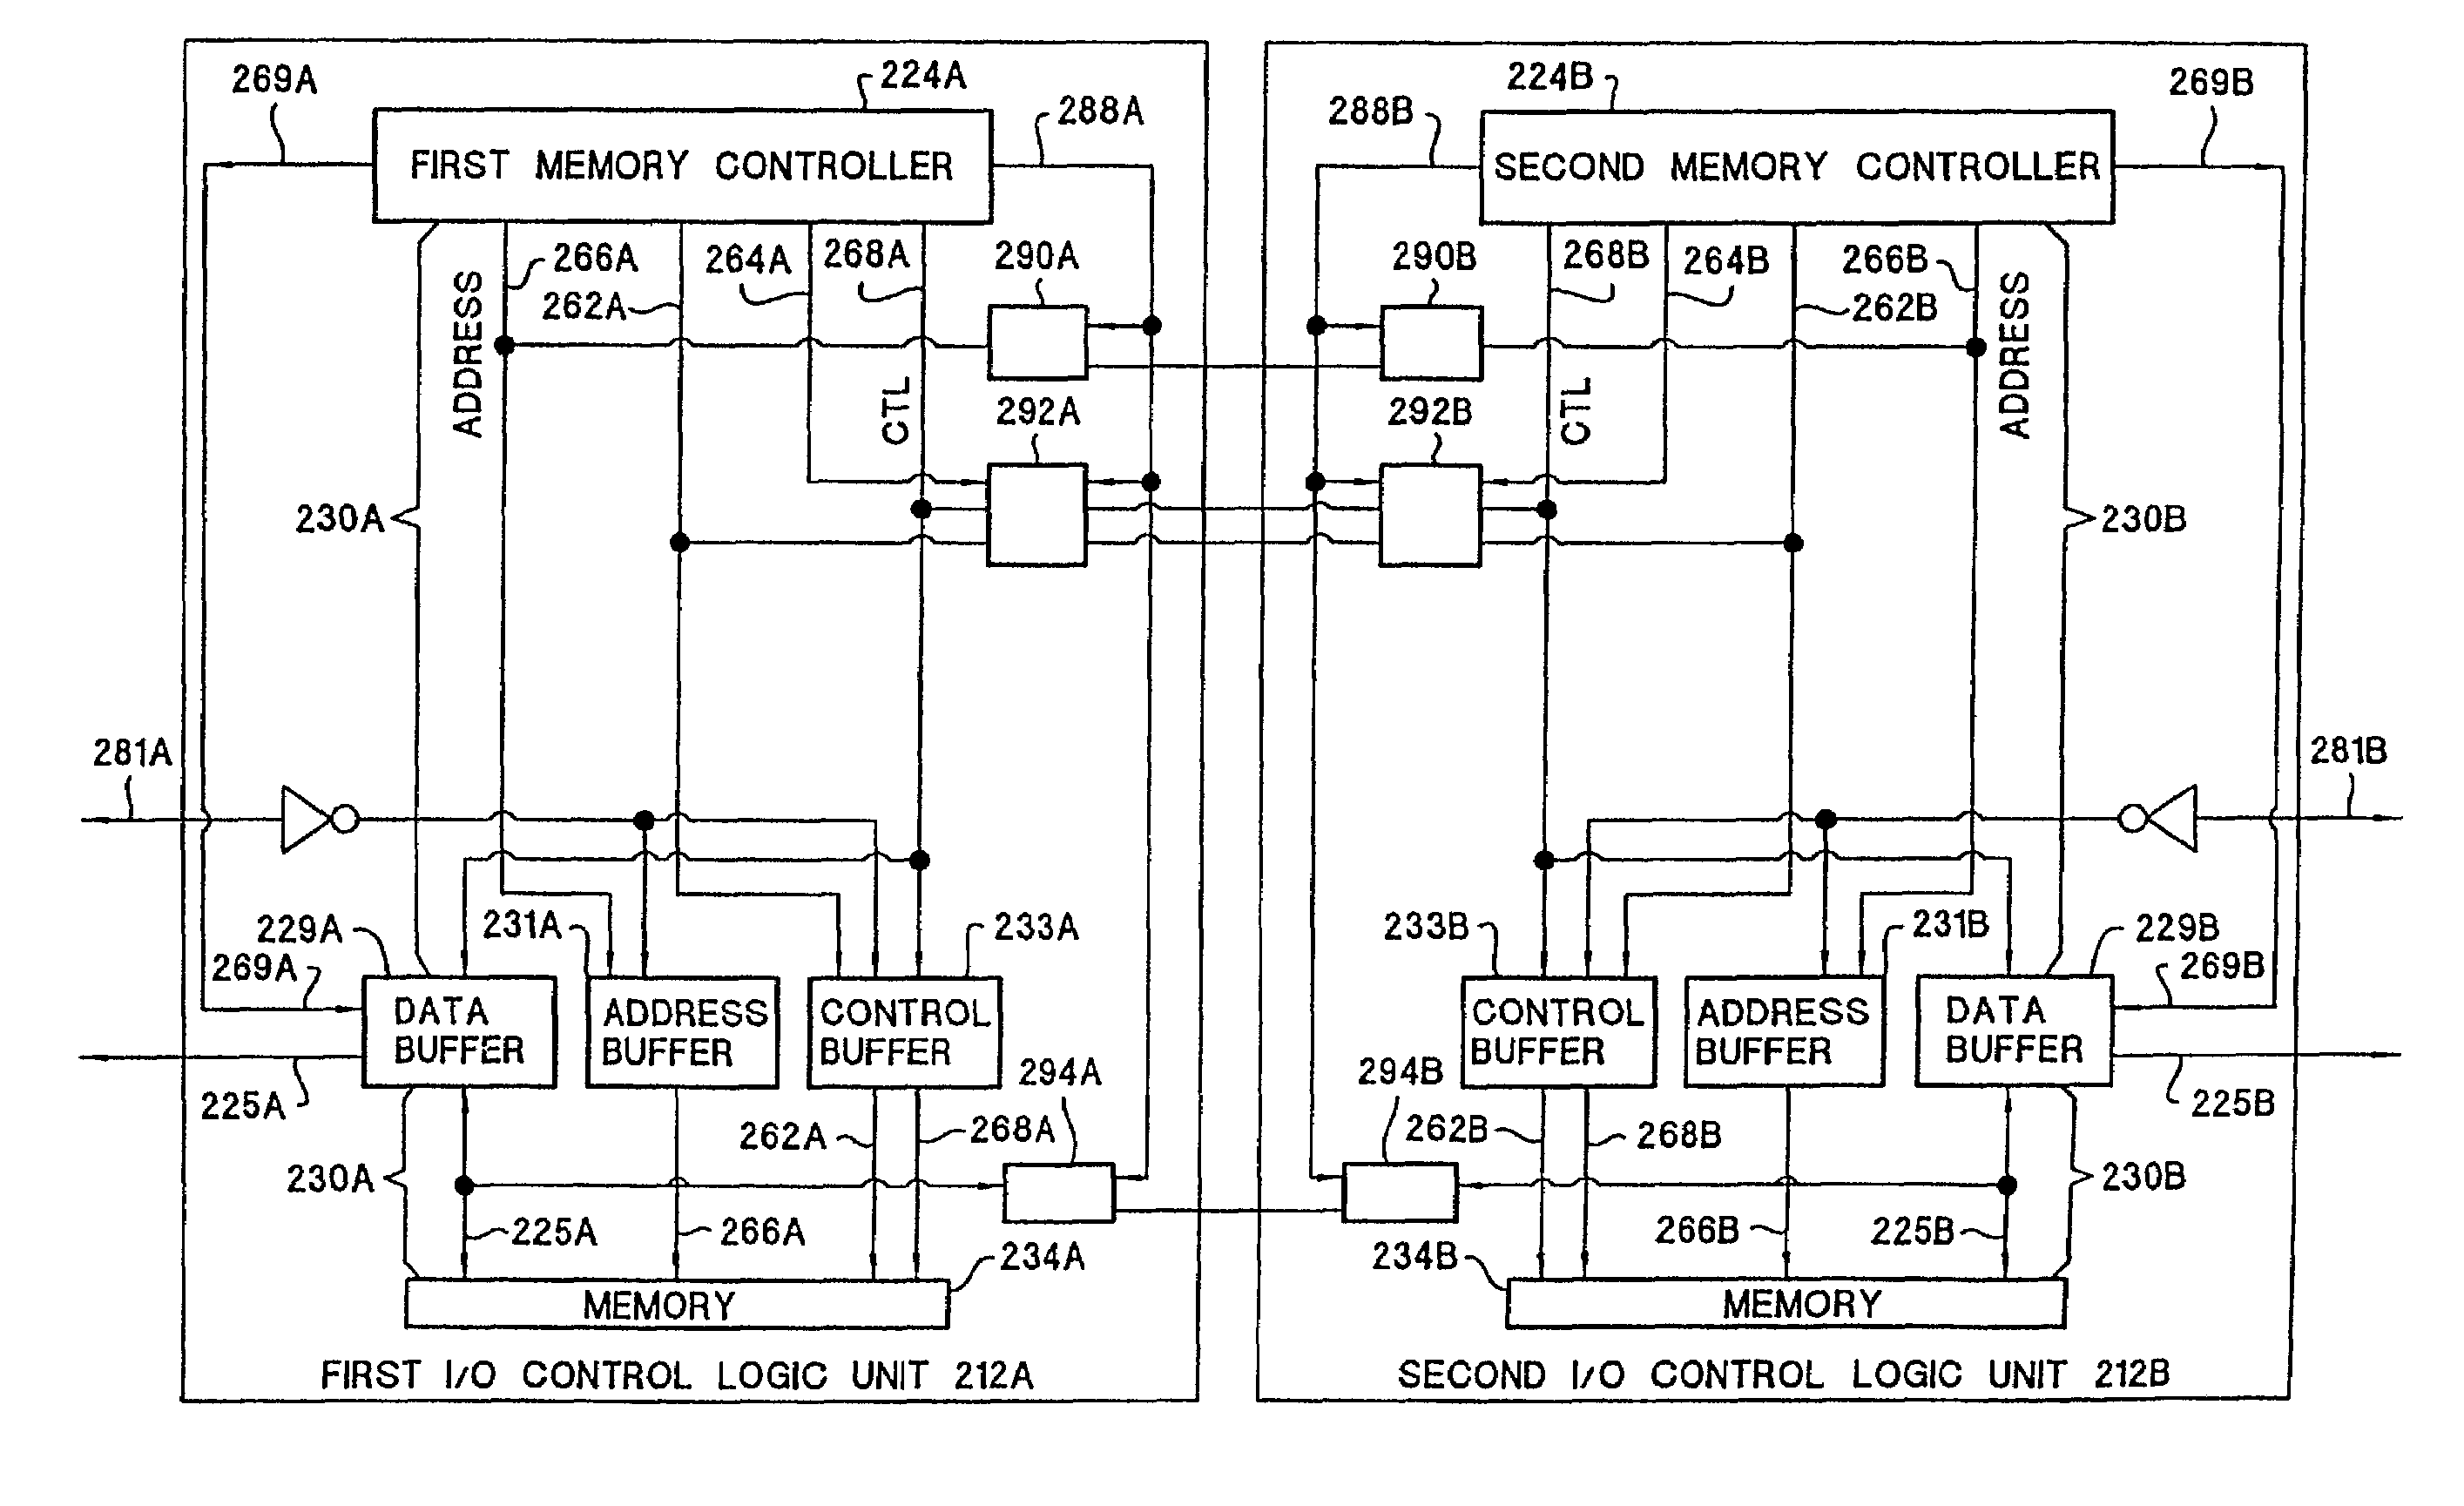 Memory controller supporting redundant synchronous memories